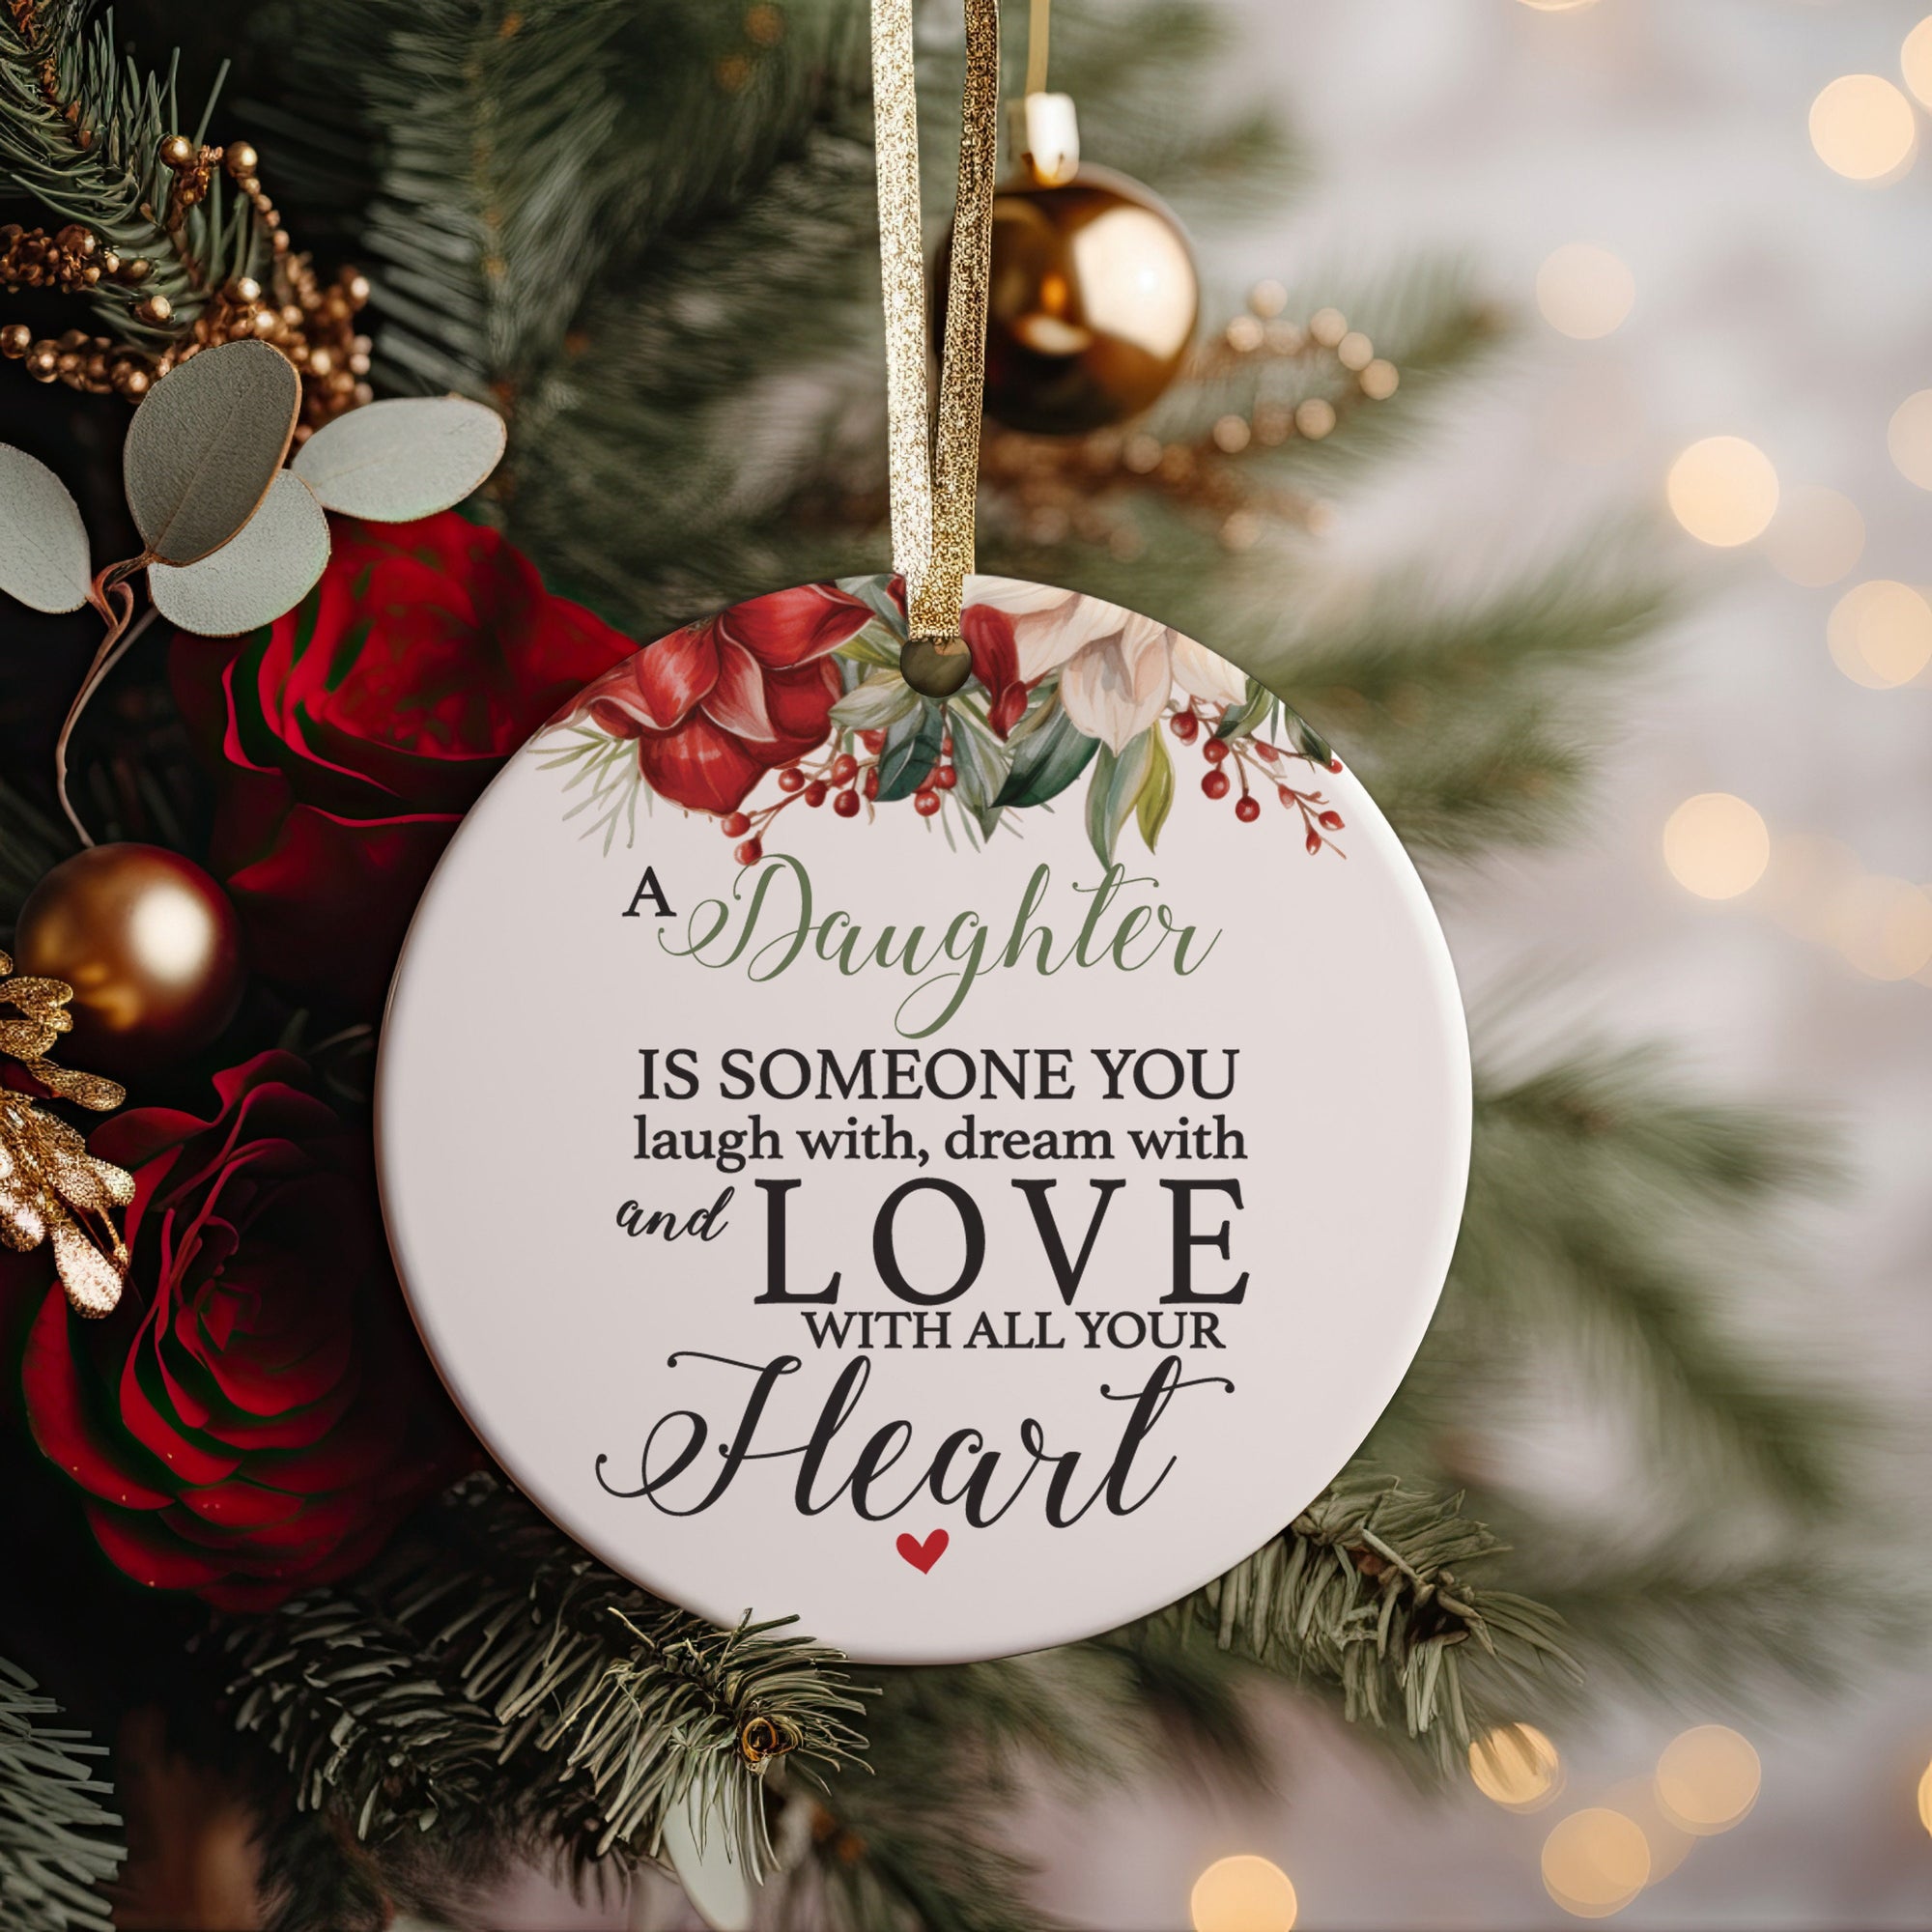 Gift Idea for Daughter from Mom or Mother A Daughter Is Someone You Love With All Your Heart Ceramic Christmas Ornament + Free Gift Box